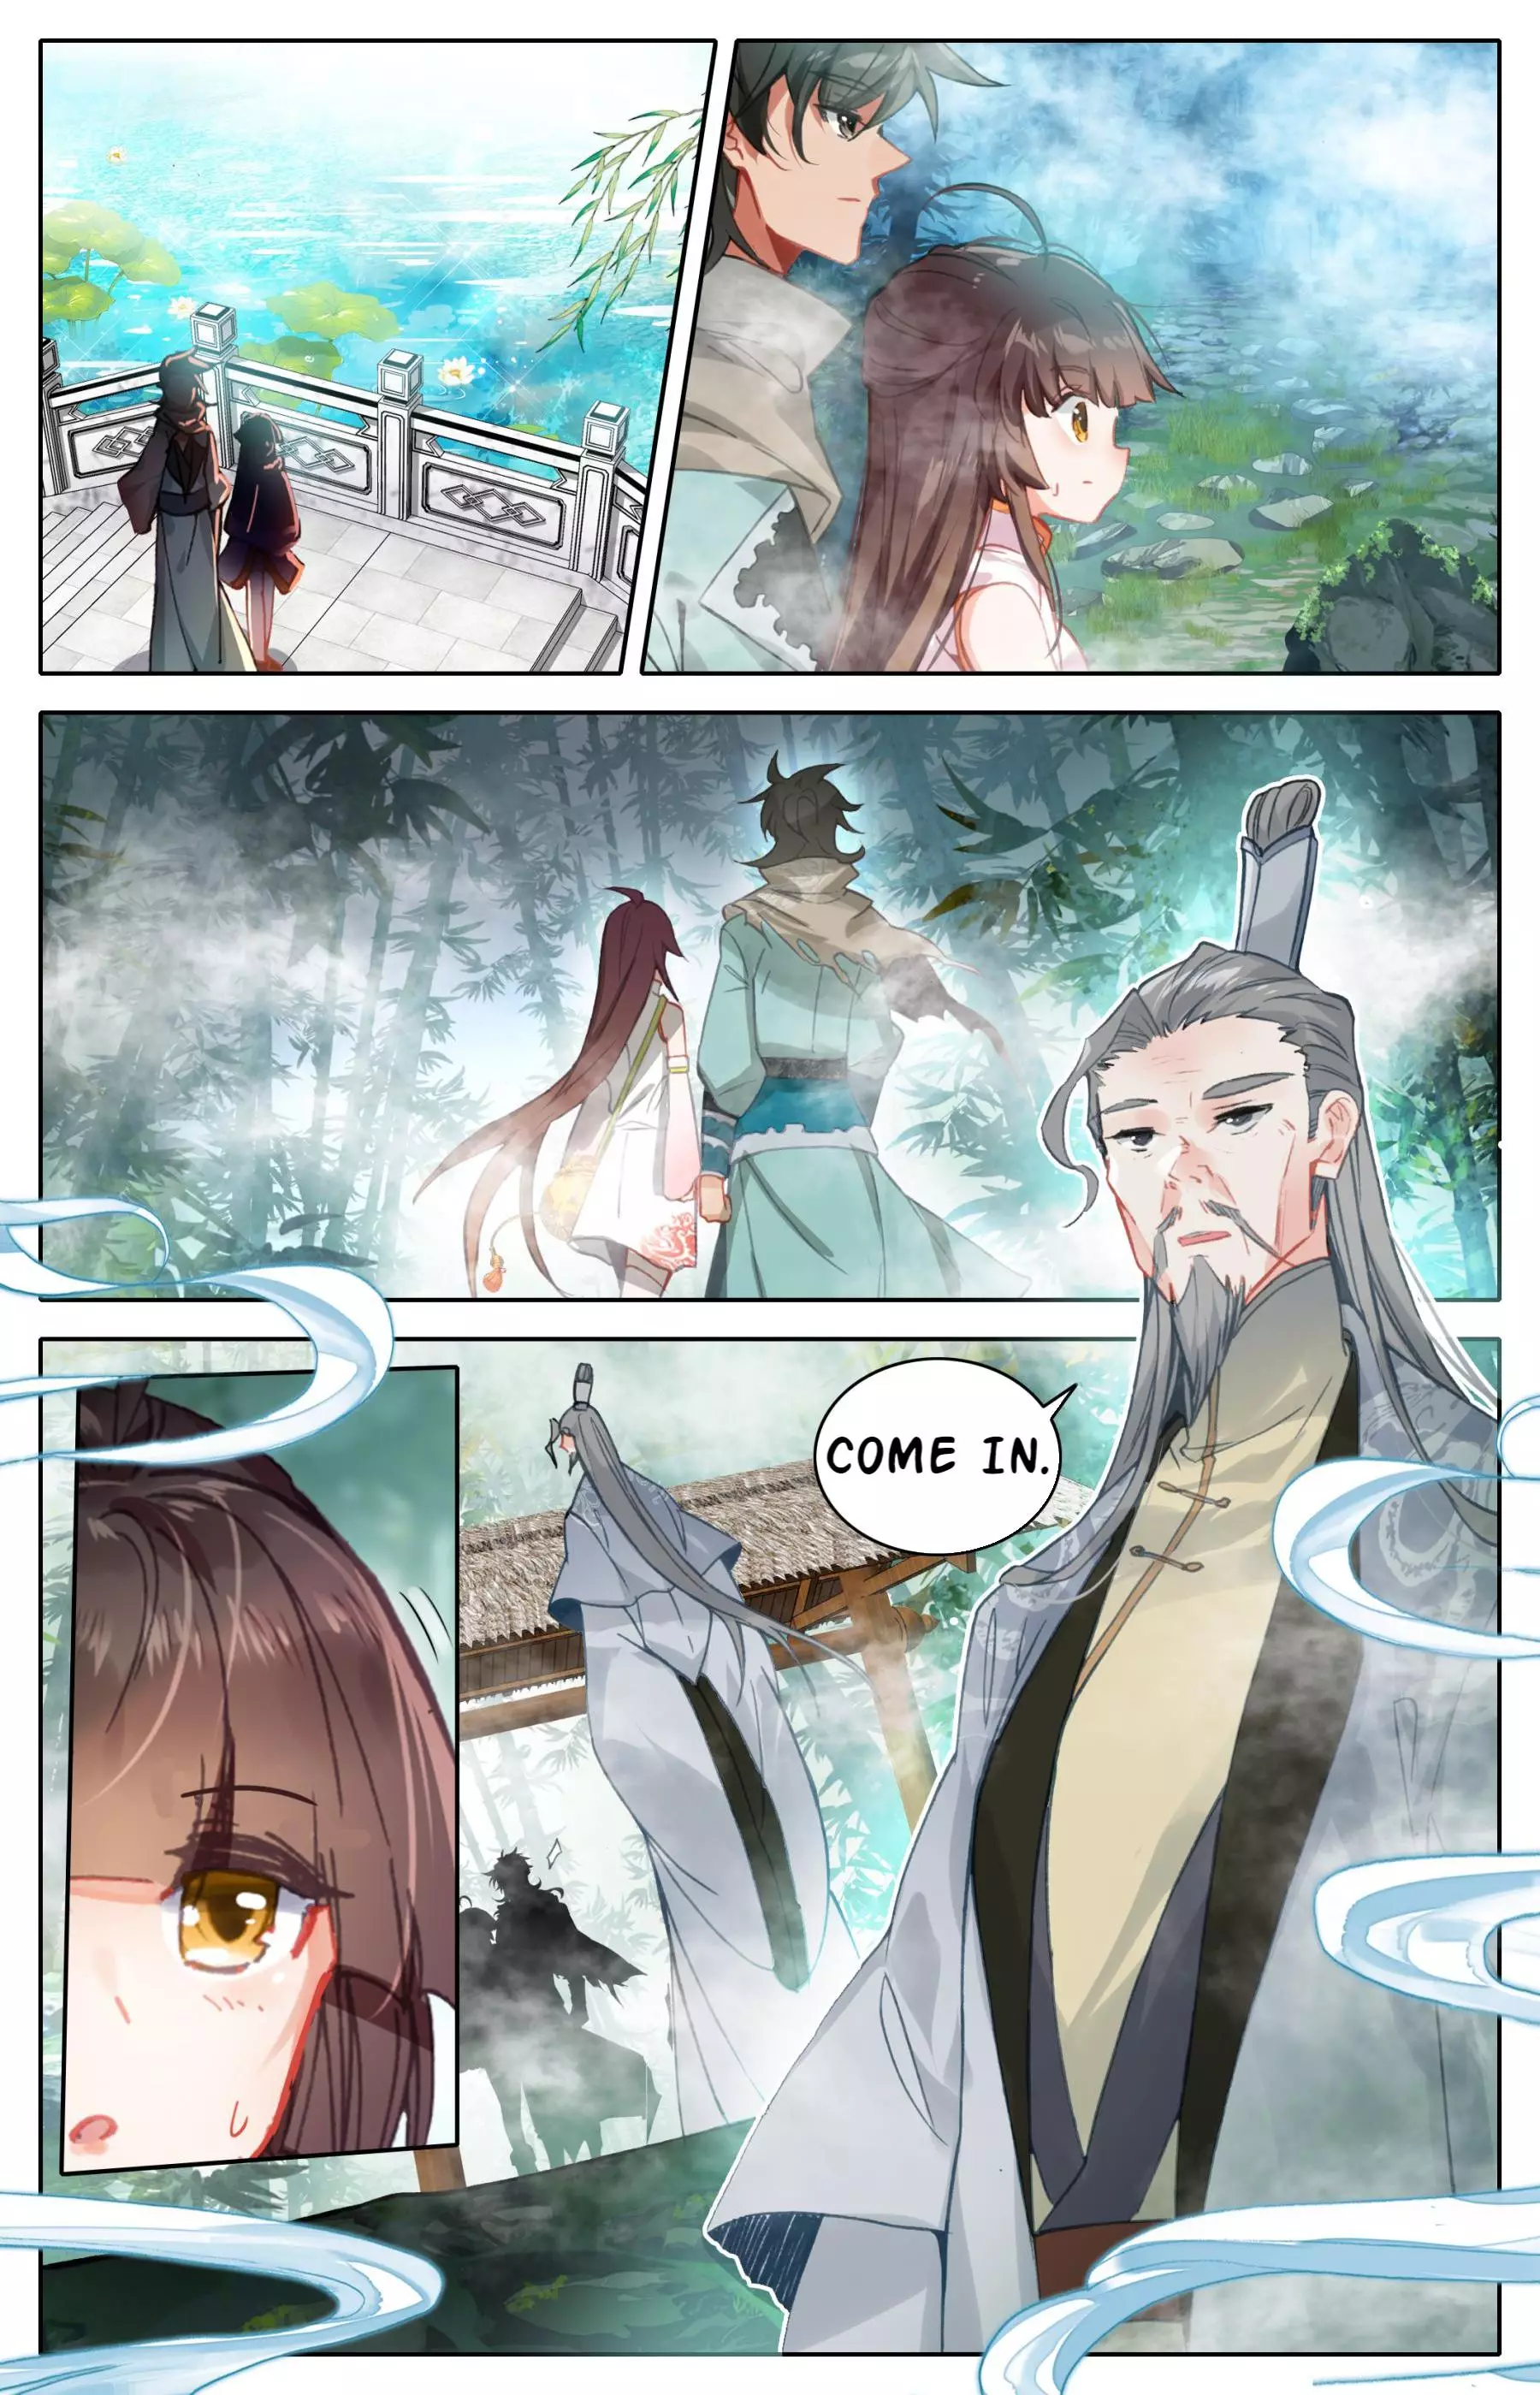 A Record Of A Mortal's Journey To Immortality—Immortal World Arc - 8 page 5-6eae51e1